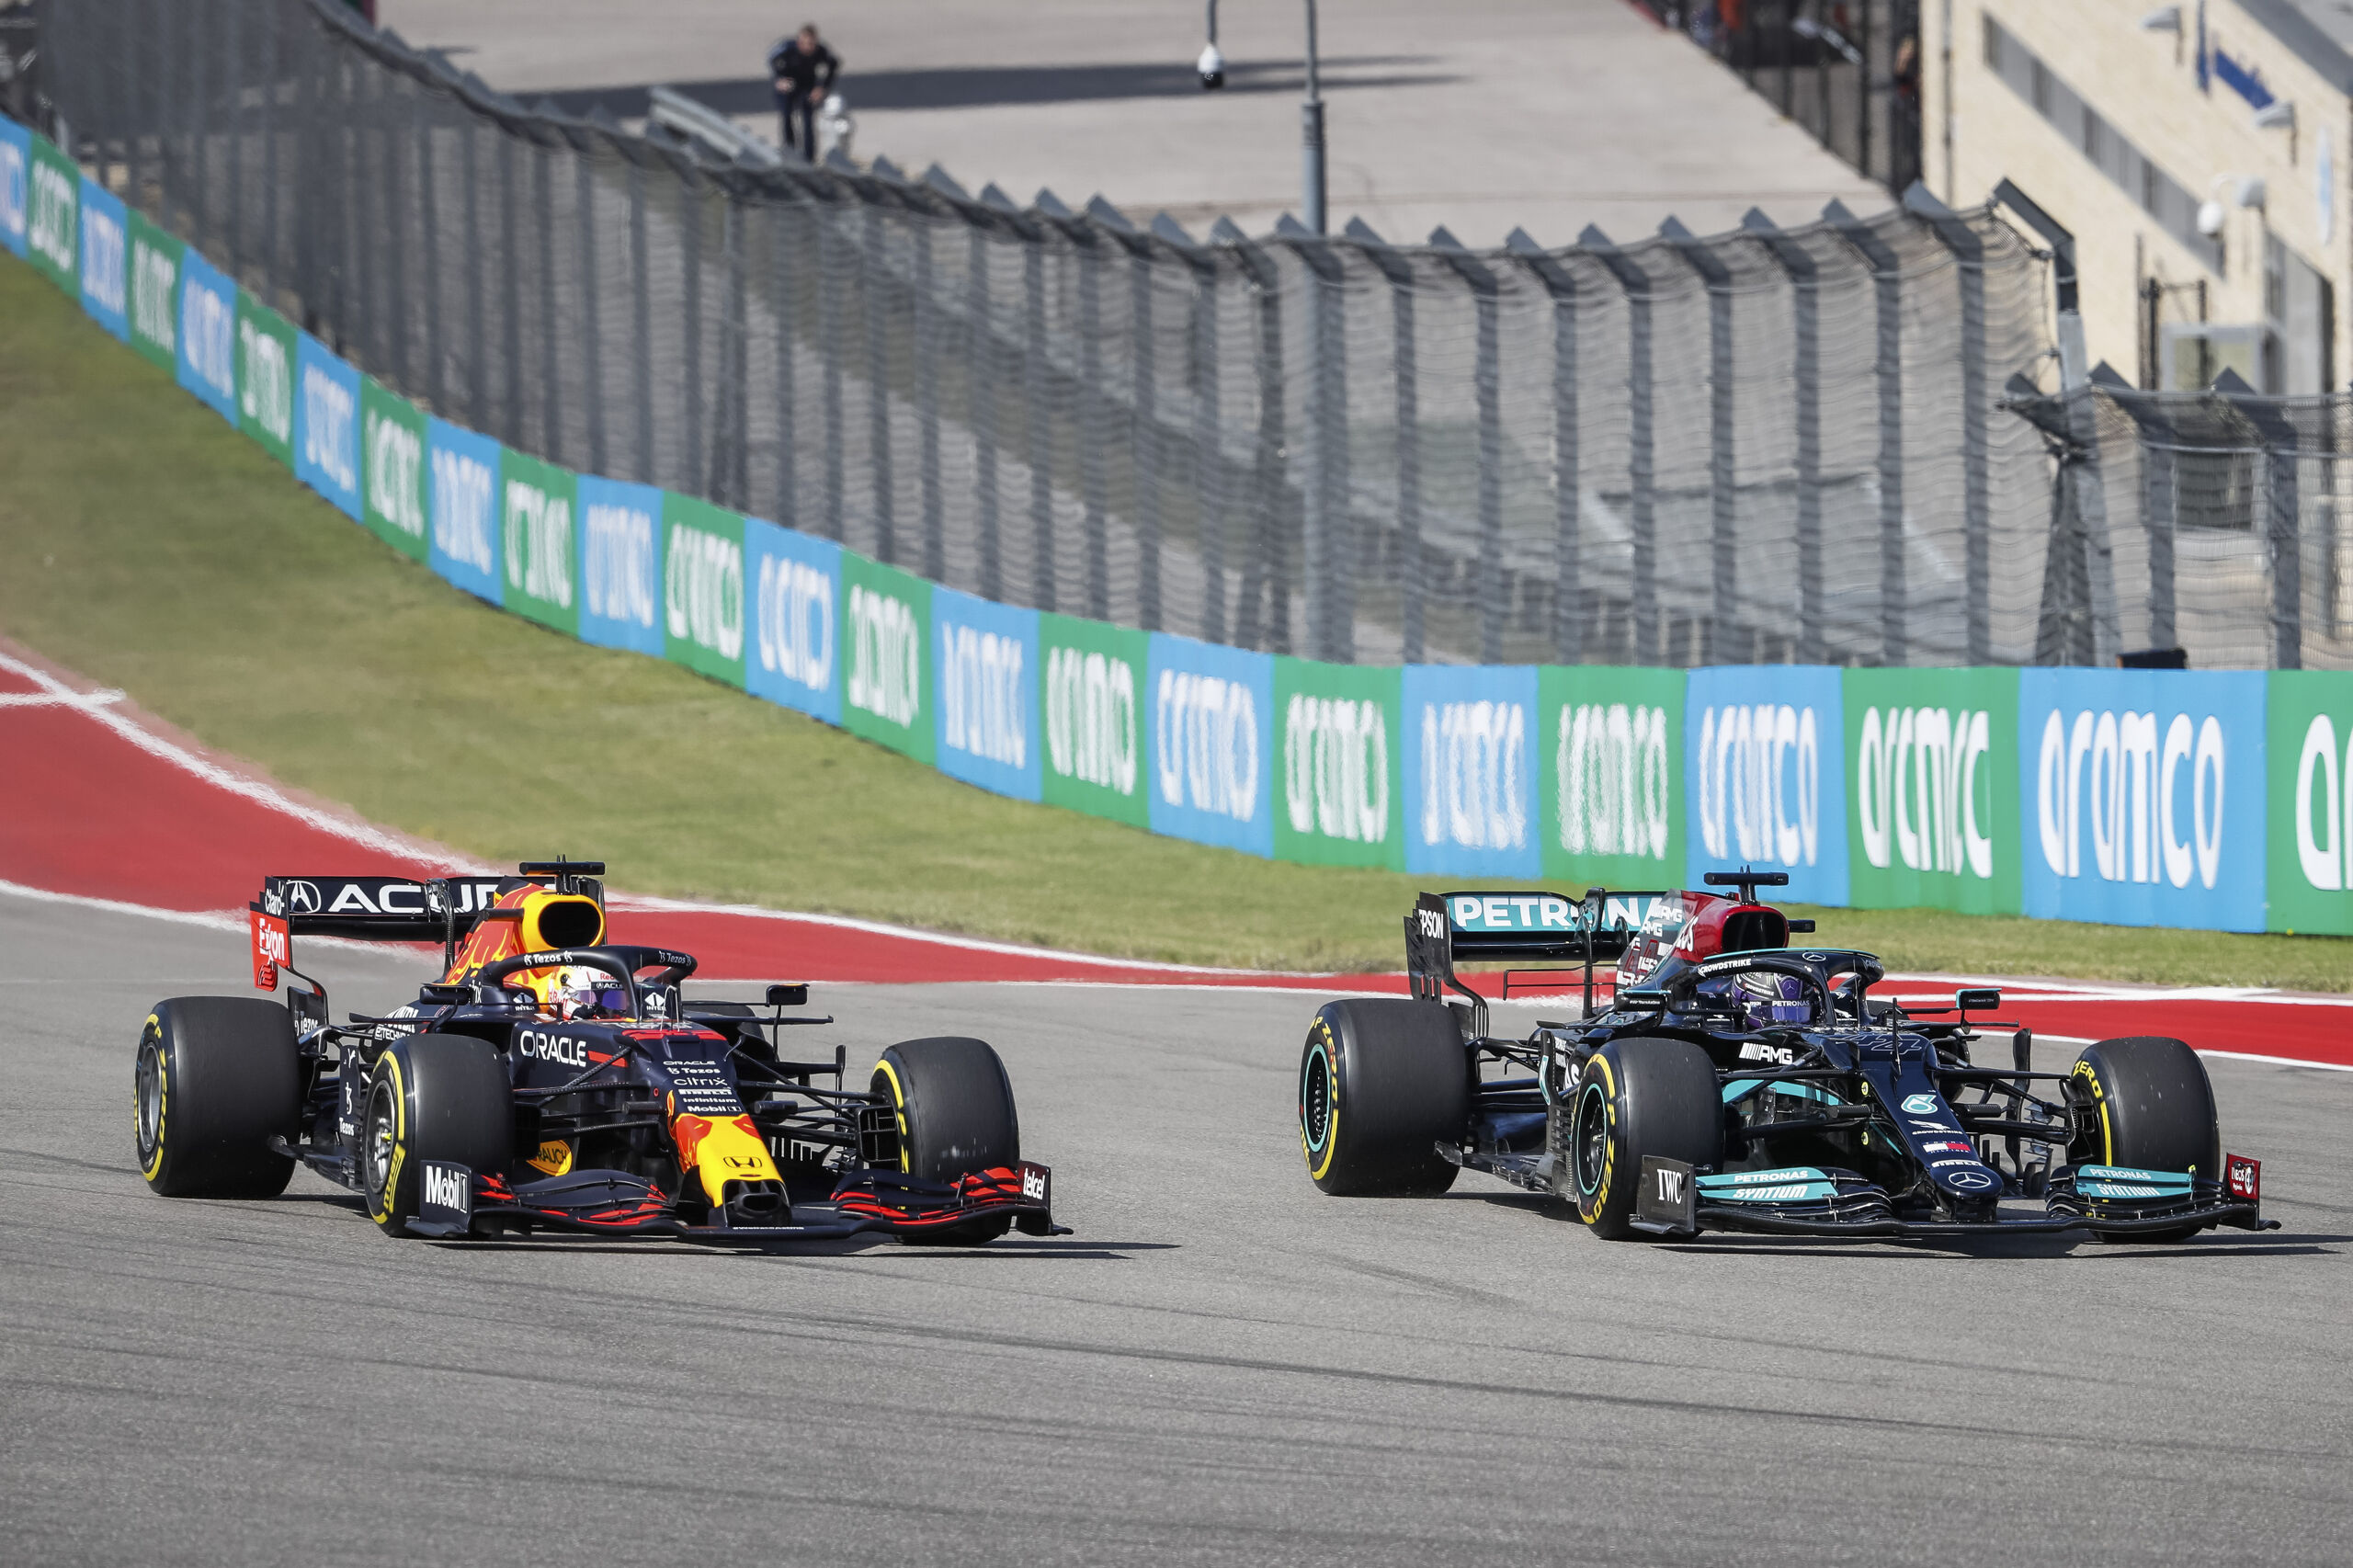 October 24, 2021, Austin, United States of America: Start, #33 Max Verstappen (NED, Red Bull Racing), #44 Lewis Hamilton (GBR, Mercedes-AMG Petronas F1 Team), F1 Grand Prix of USA at Circuit of The Americas on October 24, 2021 in Austin, United States of America. (Photo by HOCH ZWEI) (Credit Image: © Hoch Zwei via ZUMA Press Wire)